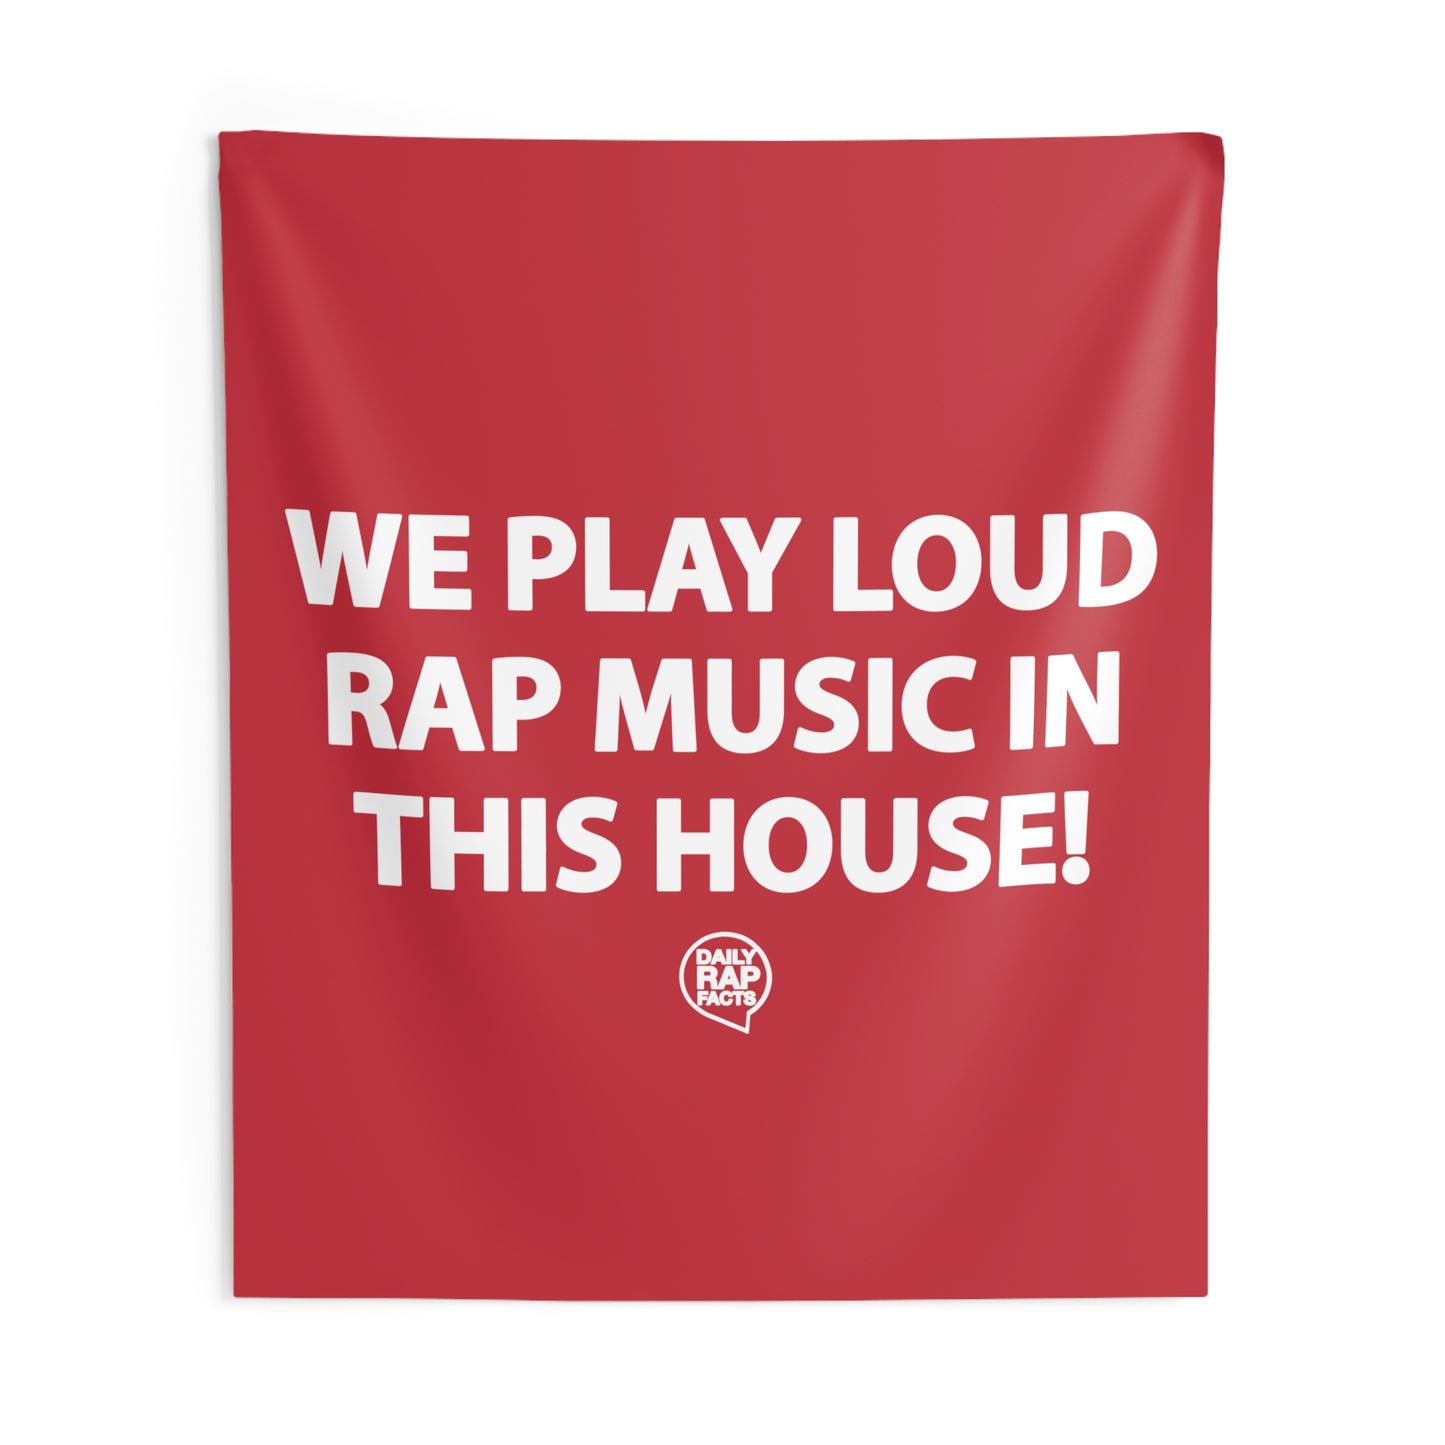 We Play Loud Rap Music In This House! Wall Tapestry